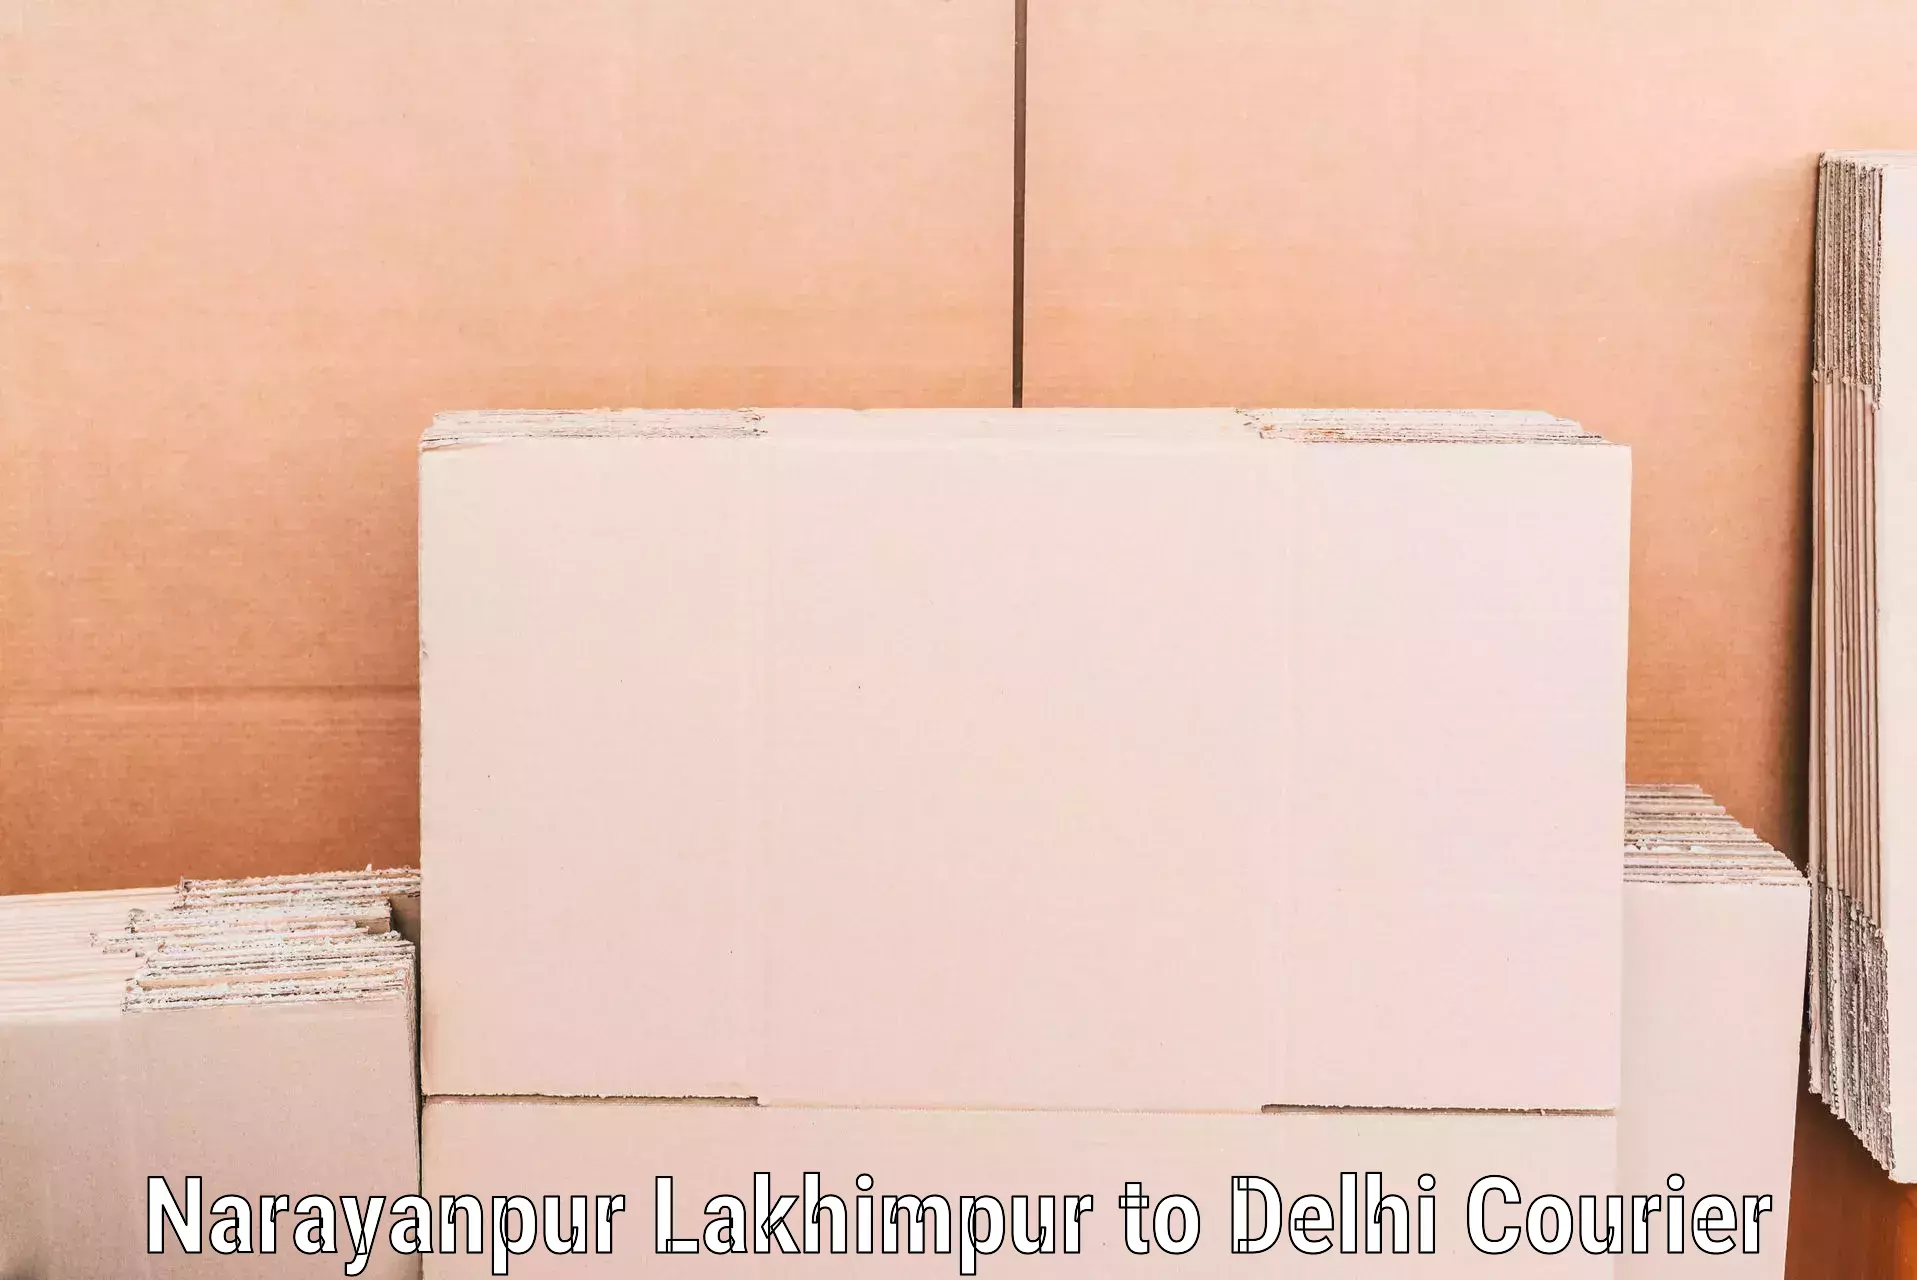 Hassle-free relocation Narayanpur Lakhimpur to Delhi Technological University DTU